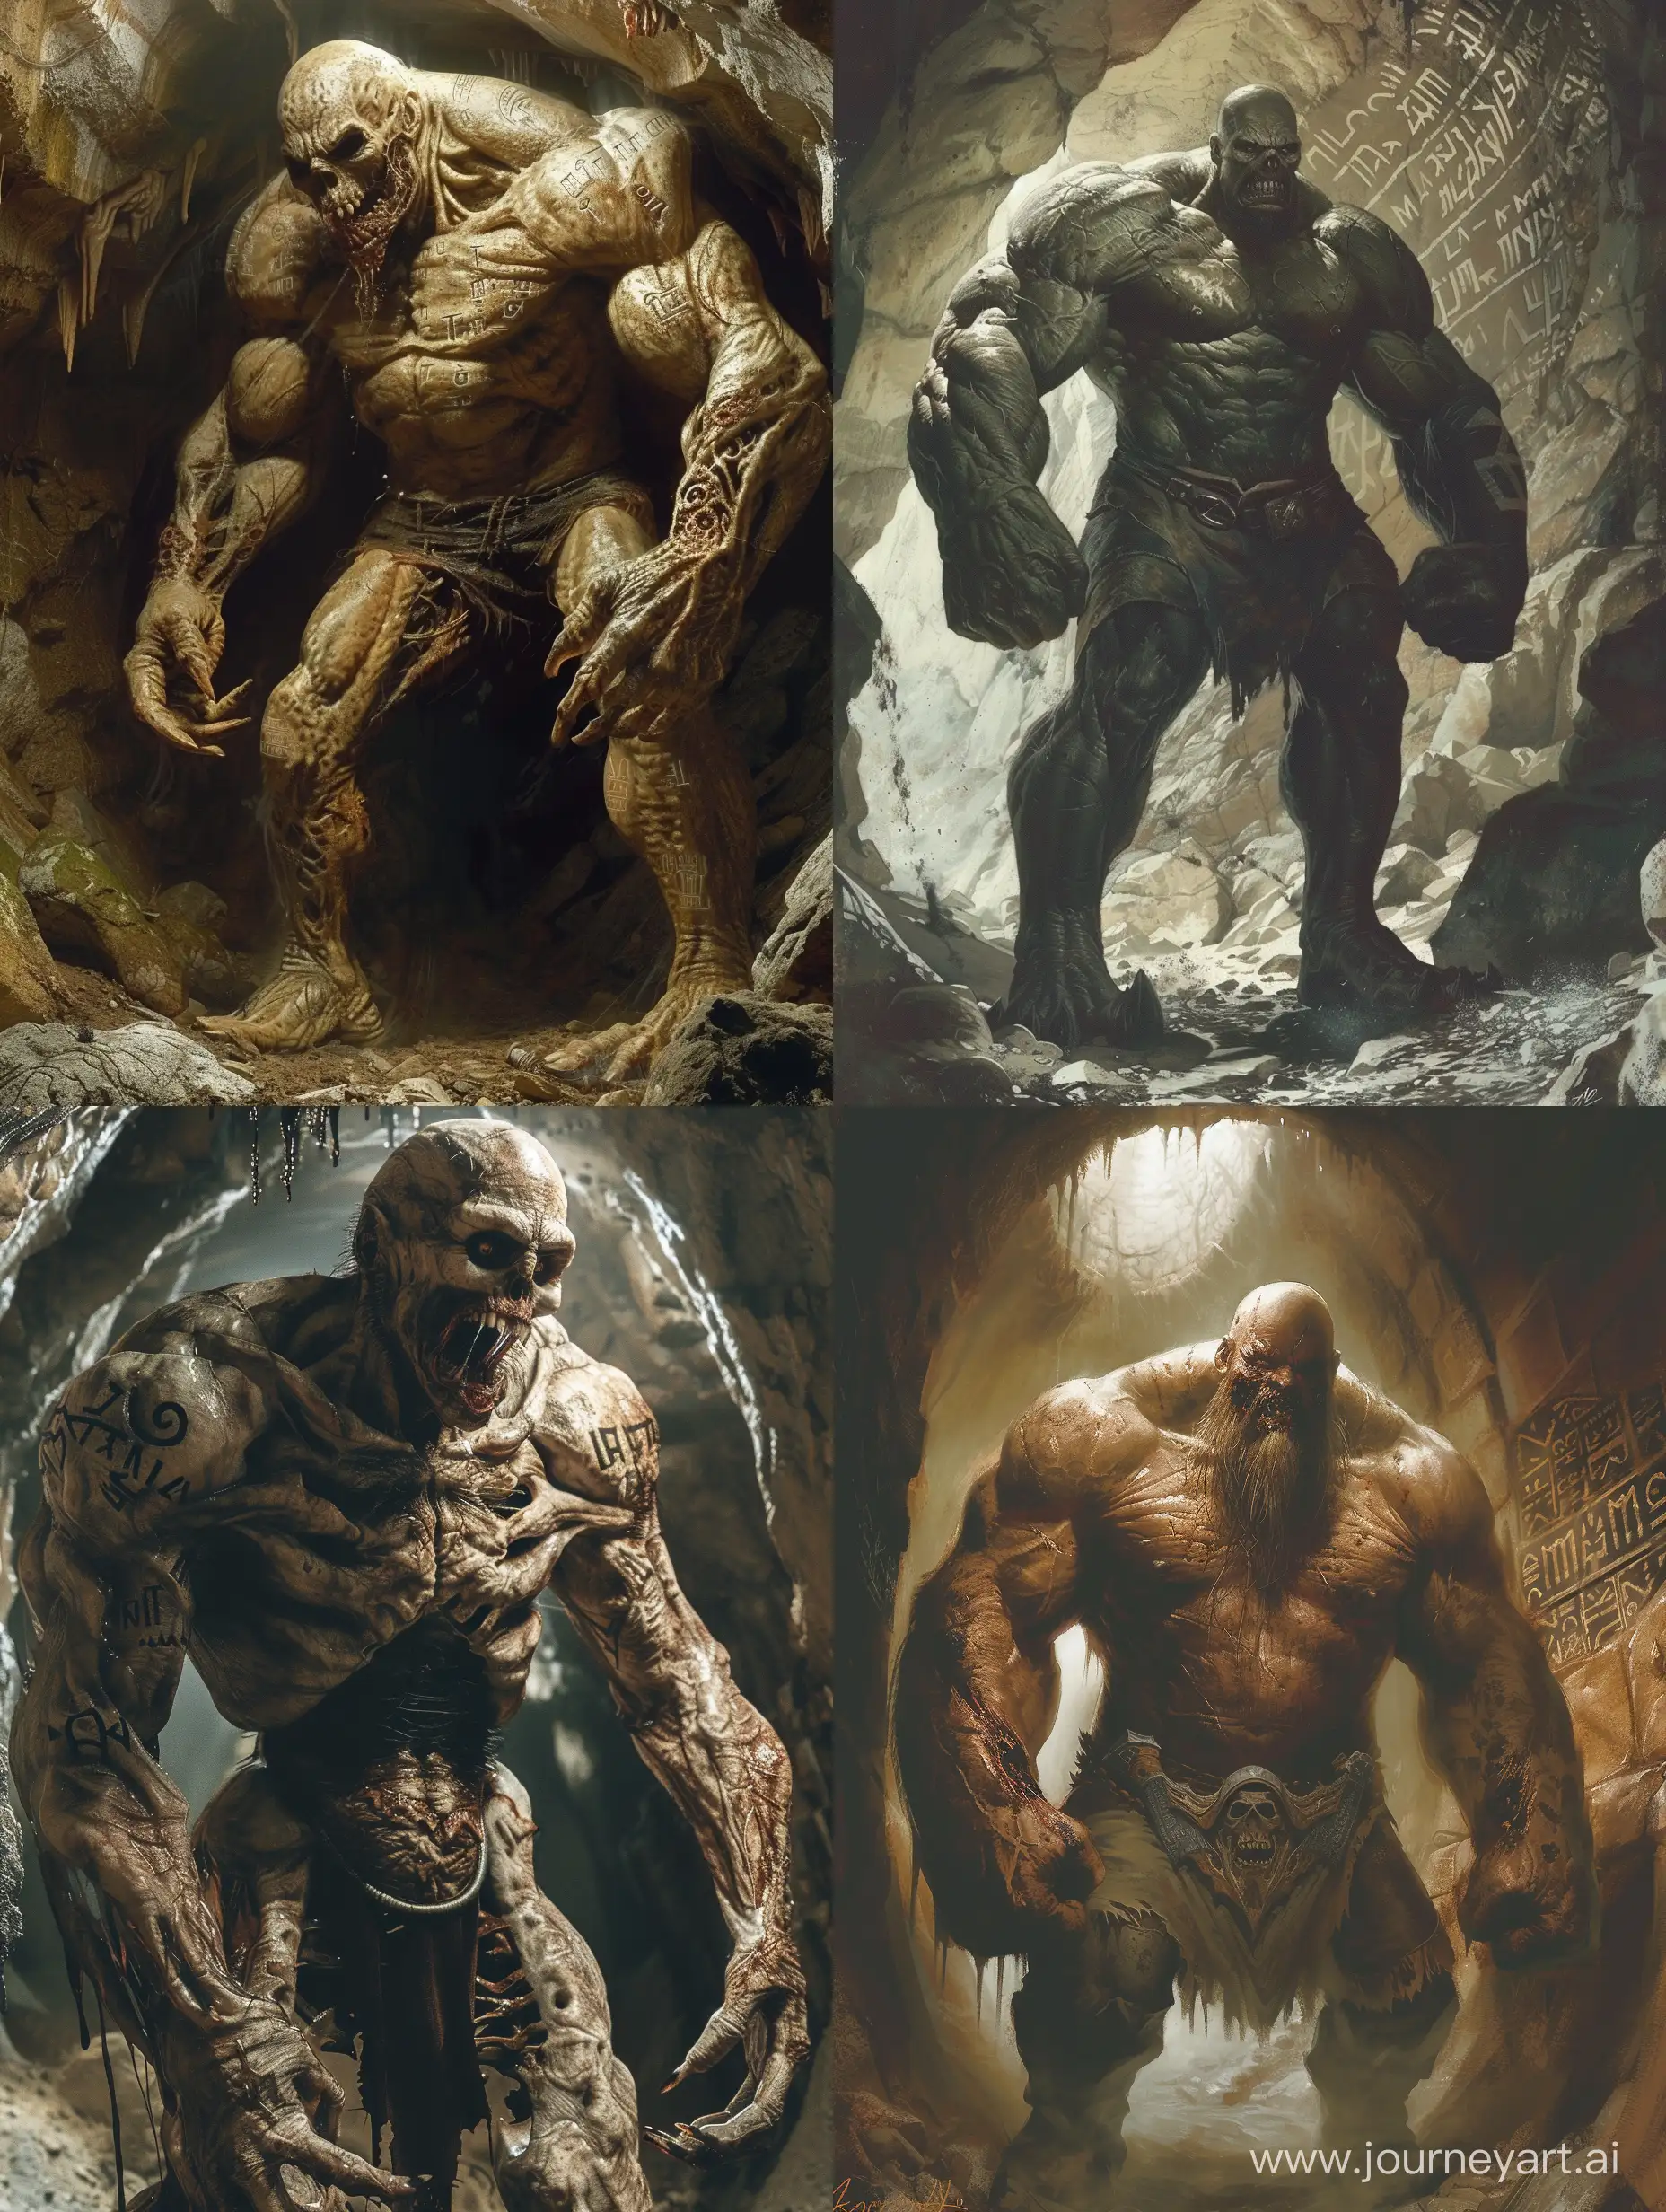 Б Big muscular zombie with big arms in full,,in a cave-like place underground,runic script,incredible detail,terrifying.